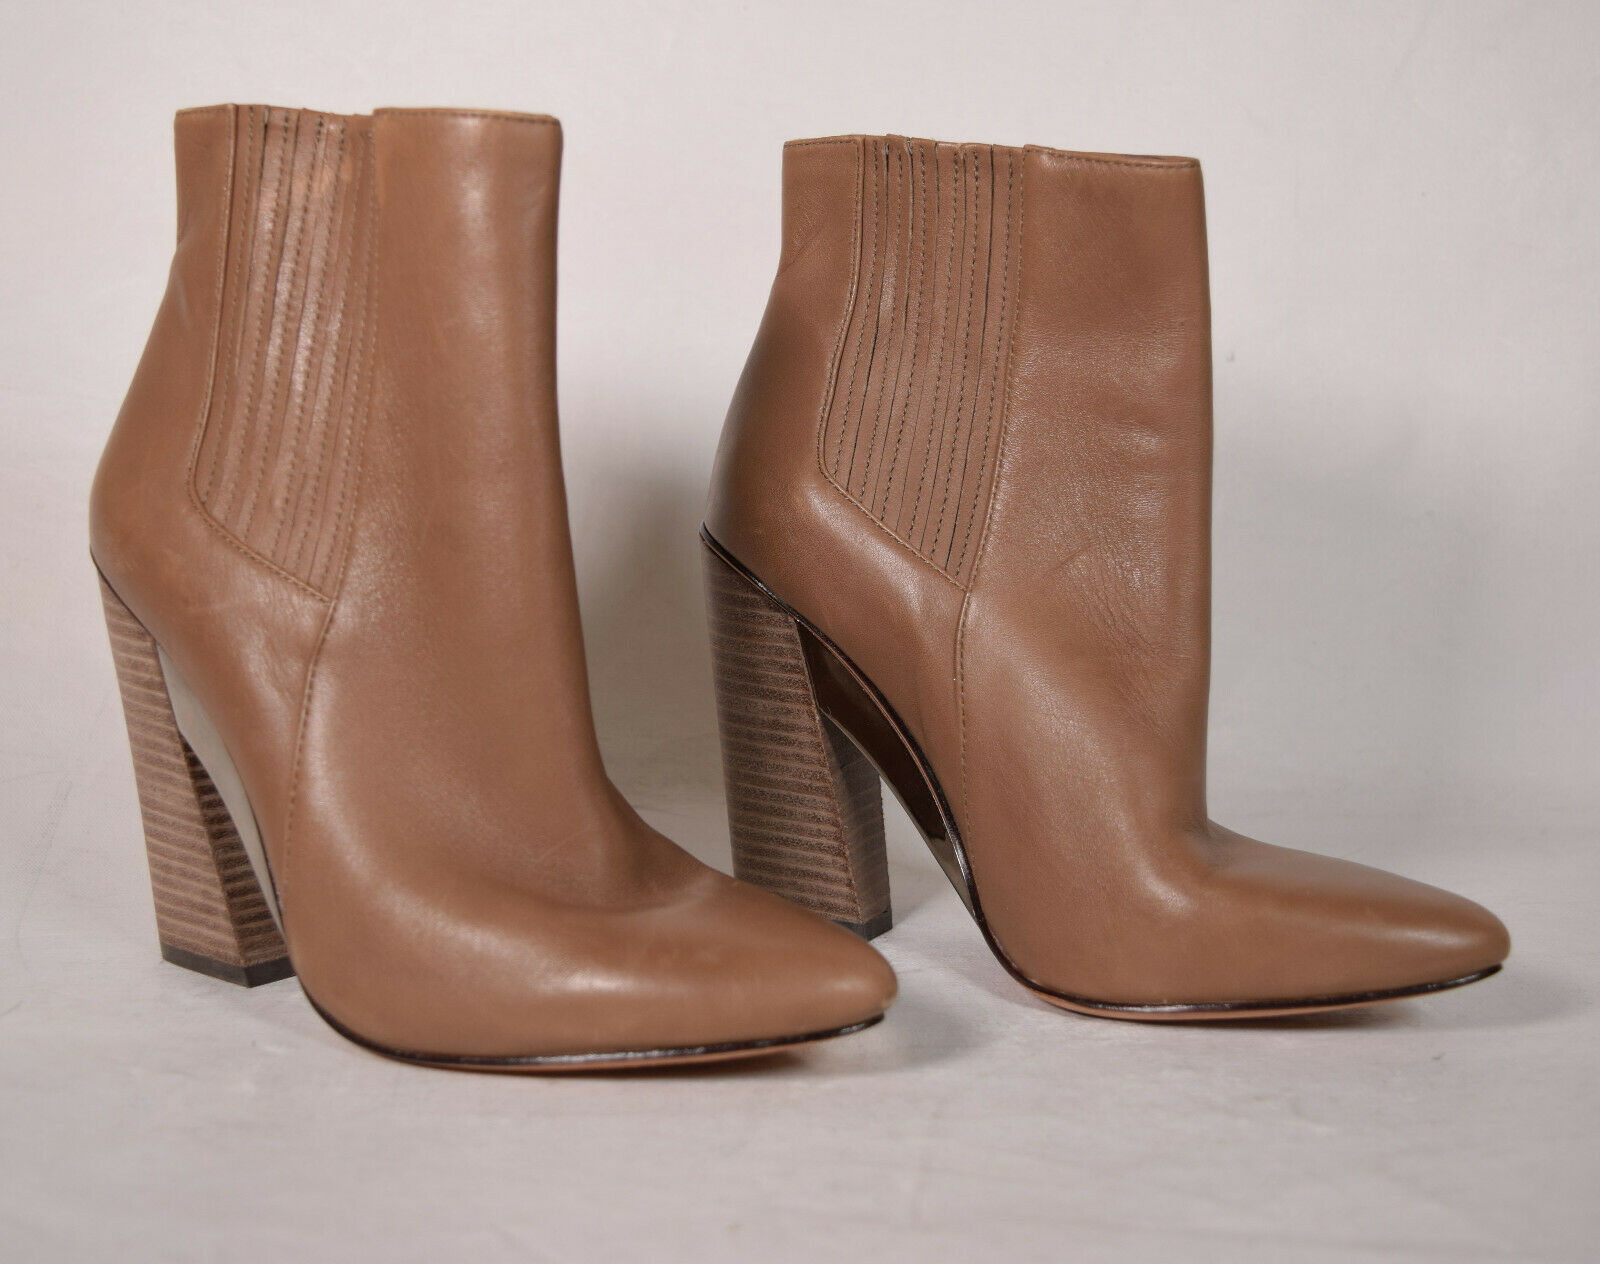 Primary image for BCBG Max Azria Boots Metild Beige Brown Leather Heel Booties Shoes 6 M Womens